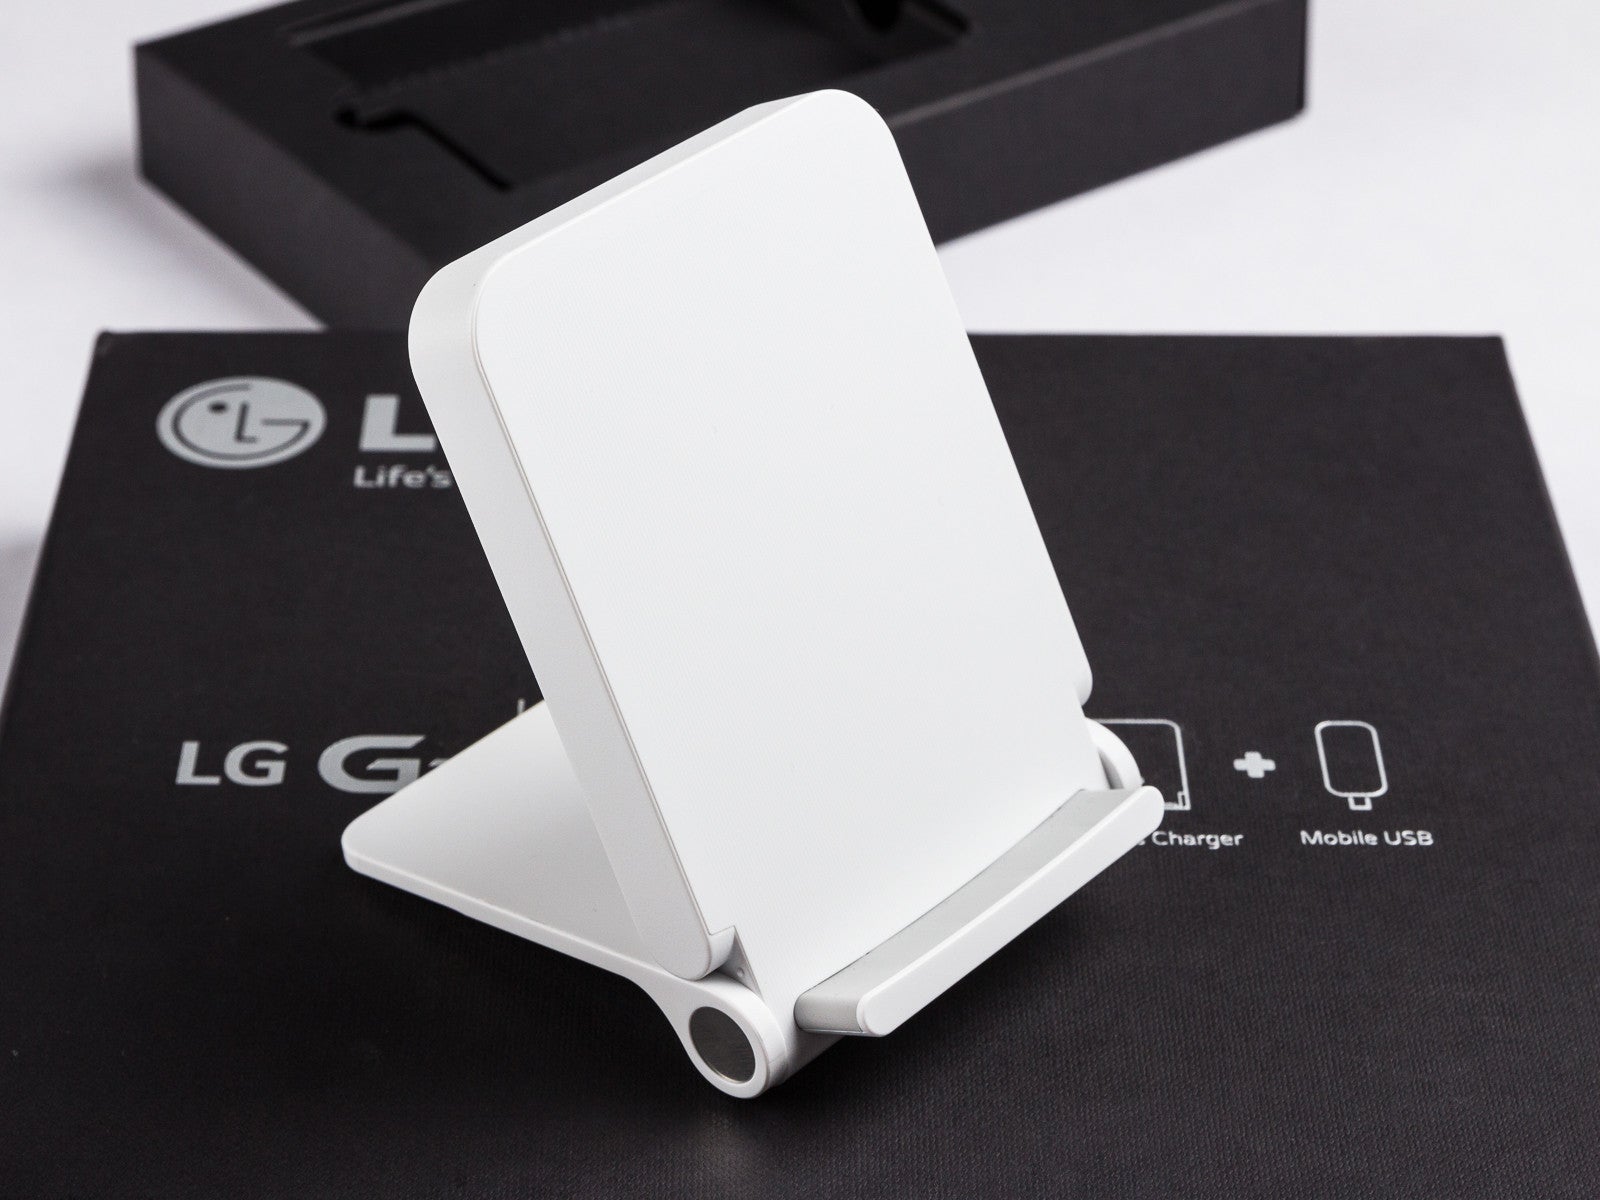 G3 Wireless Charger (WCD-100) hands-on - PhoneArena